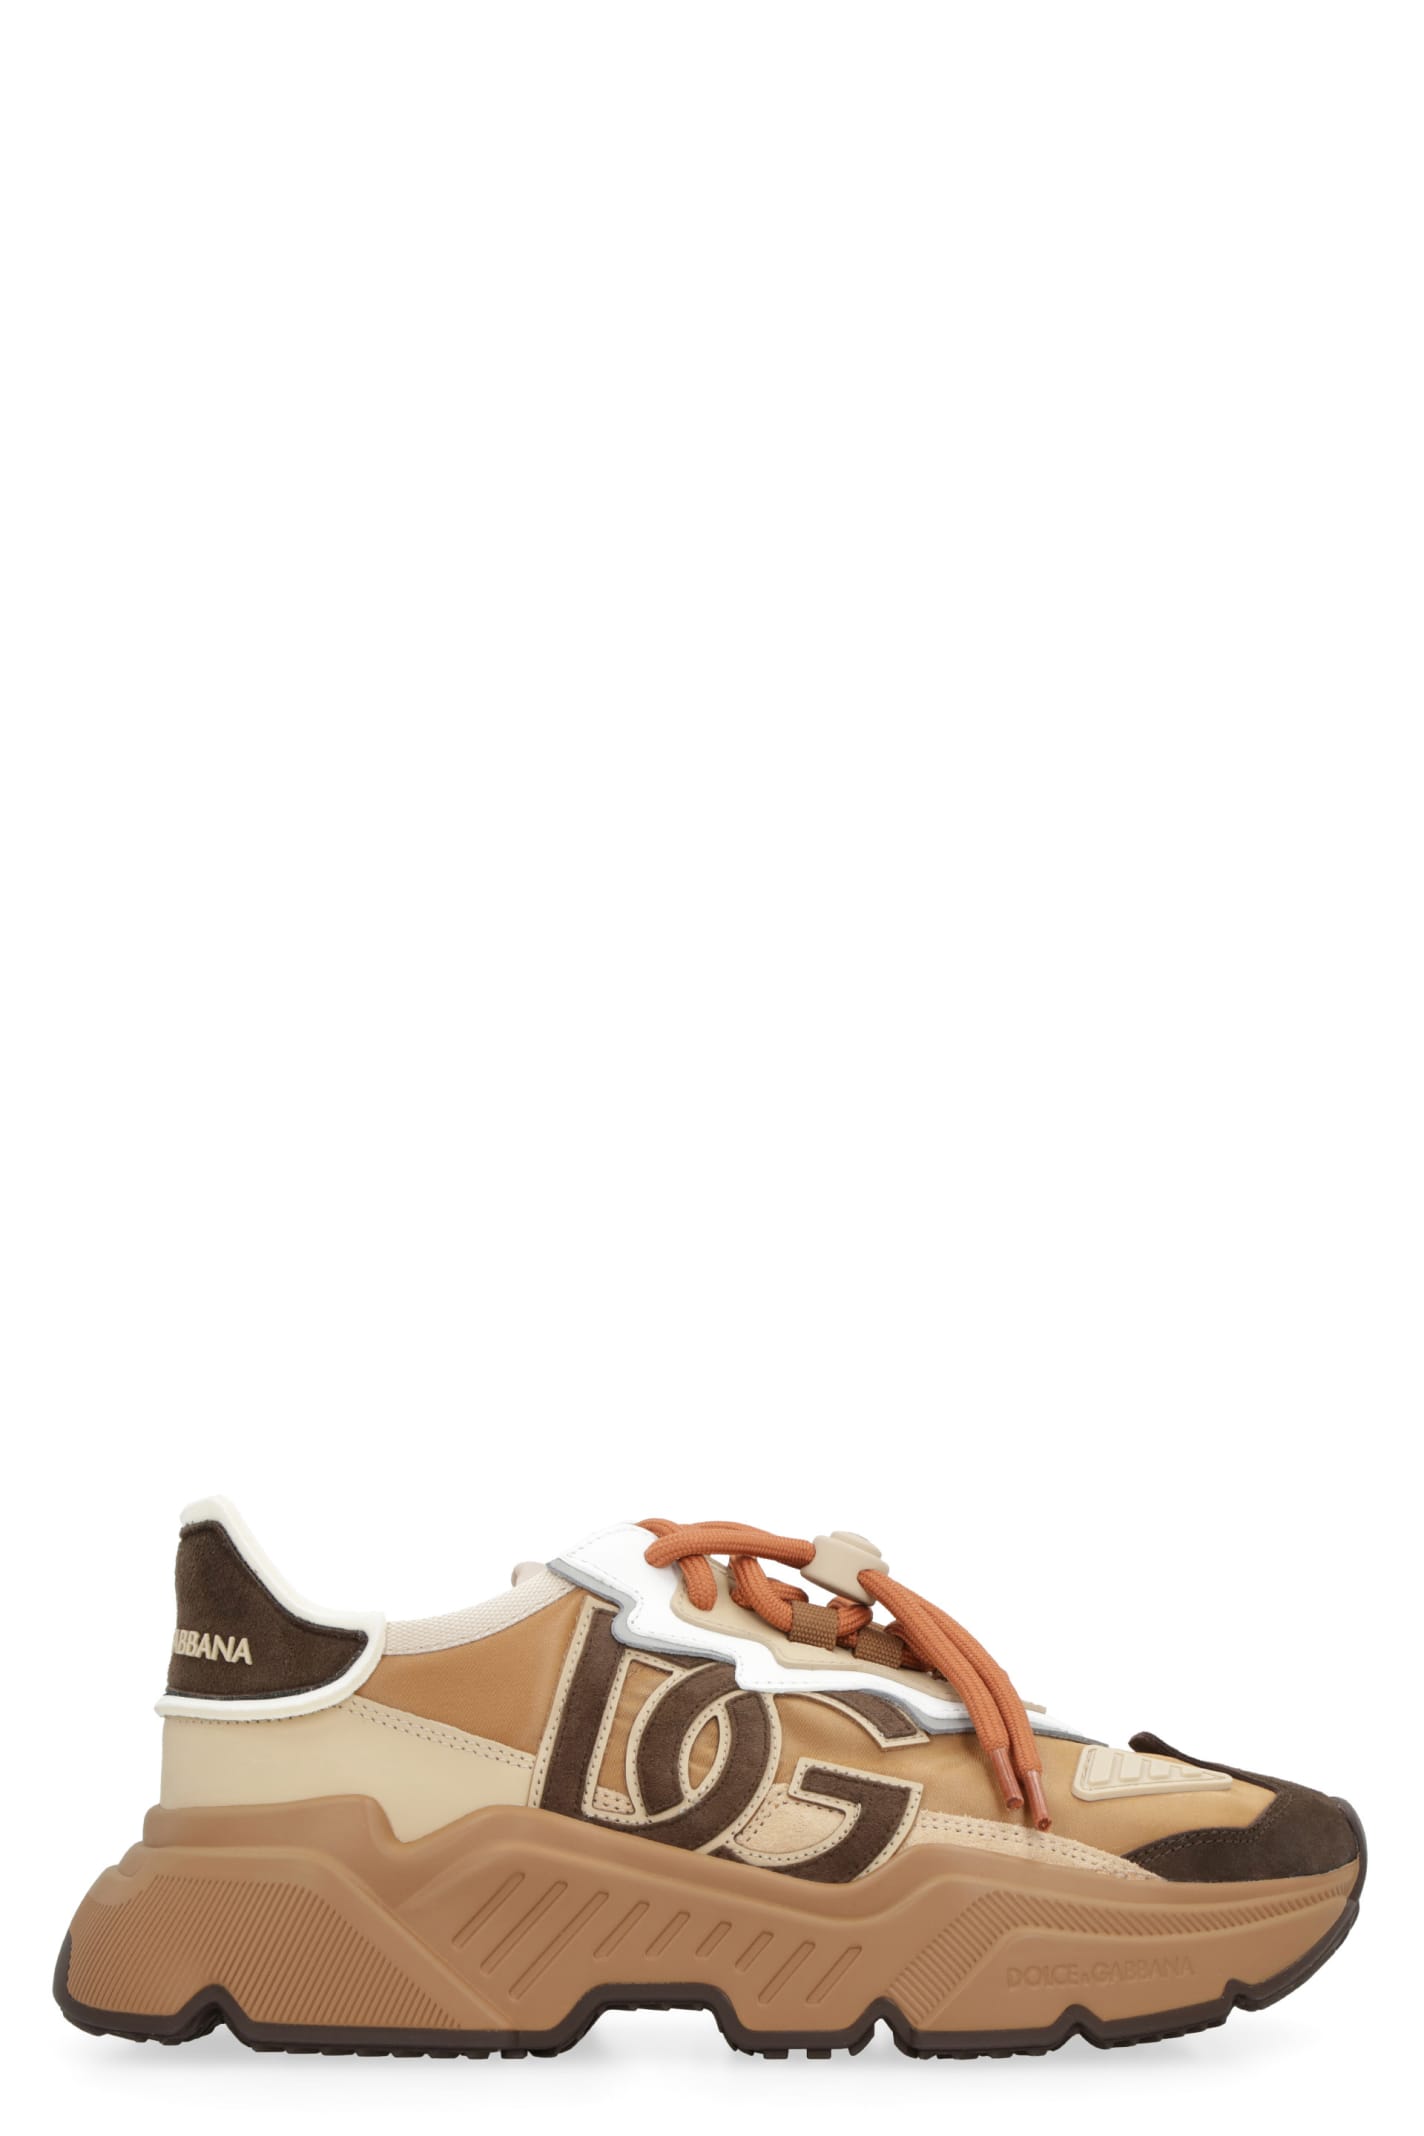 Dolce & Gabbana Daymaster Nylon Low-top Sneakers